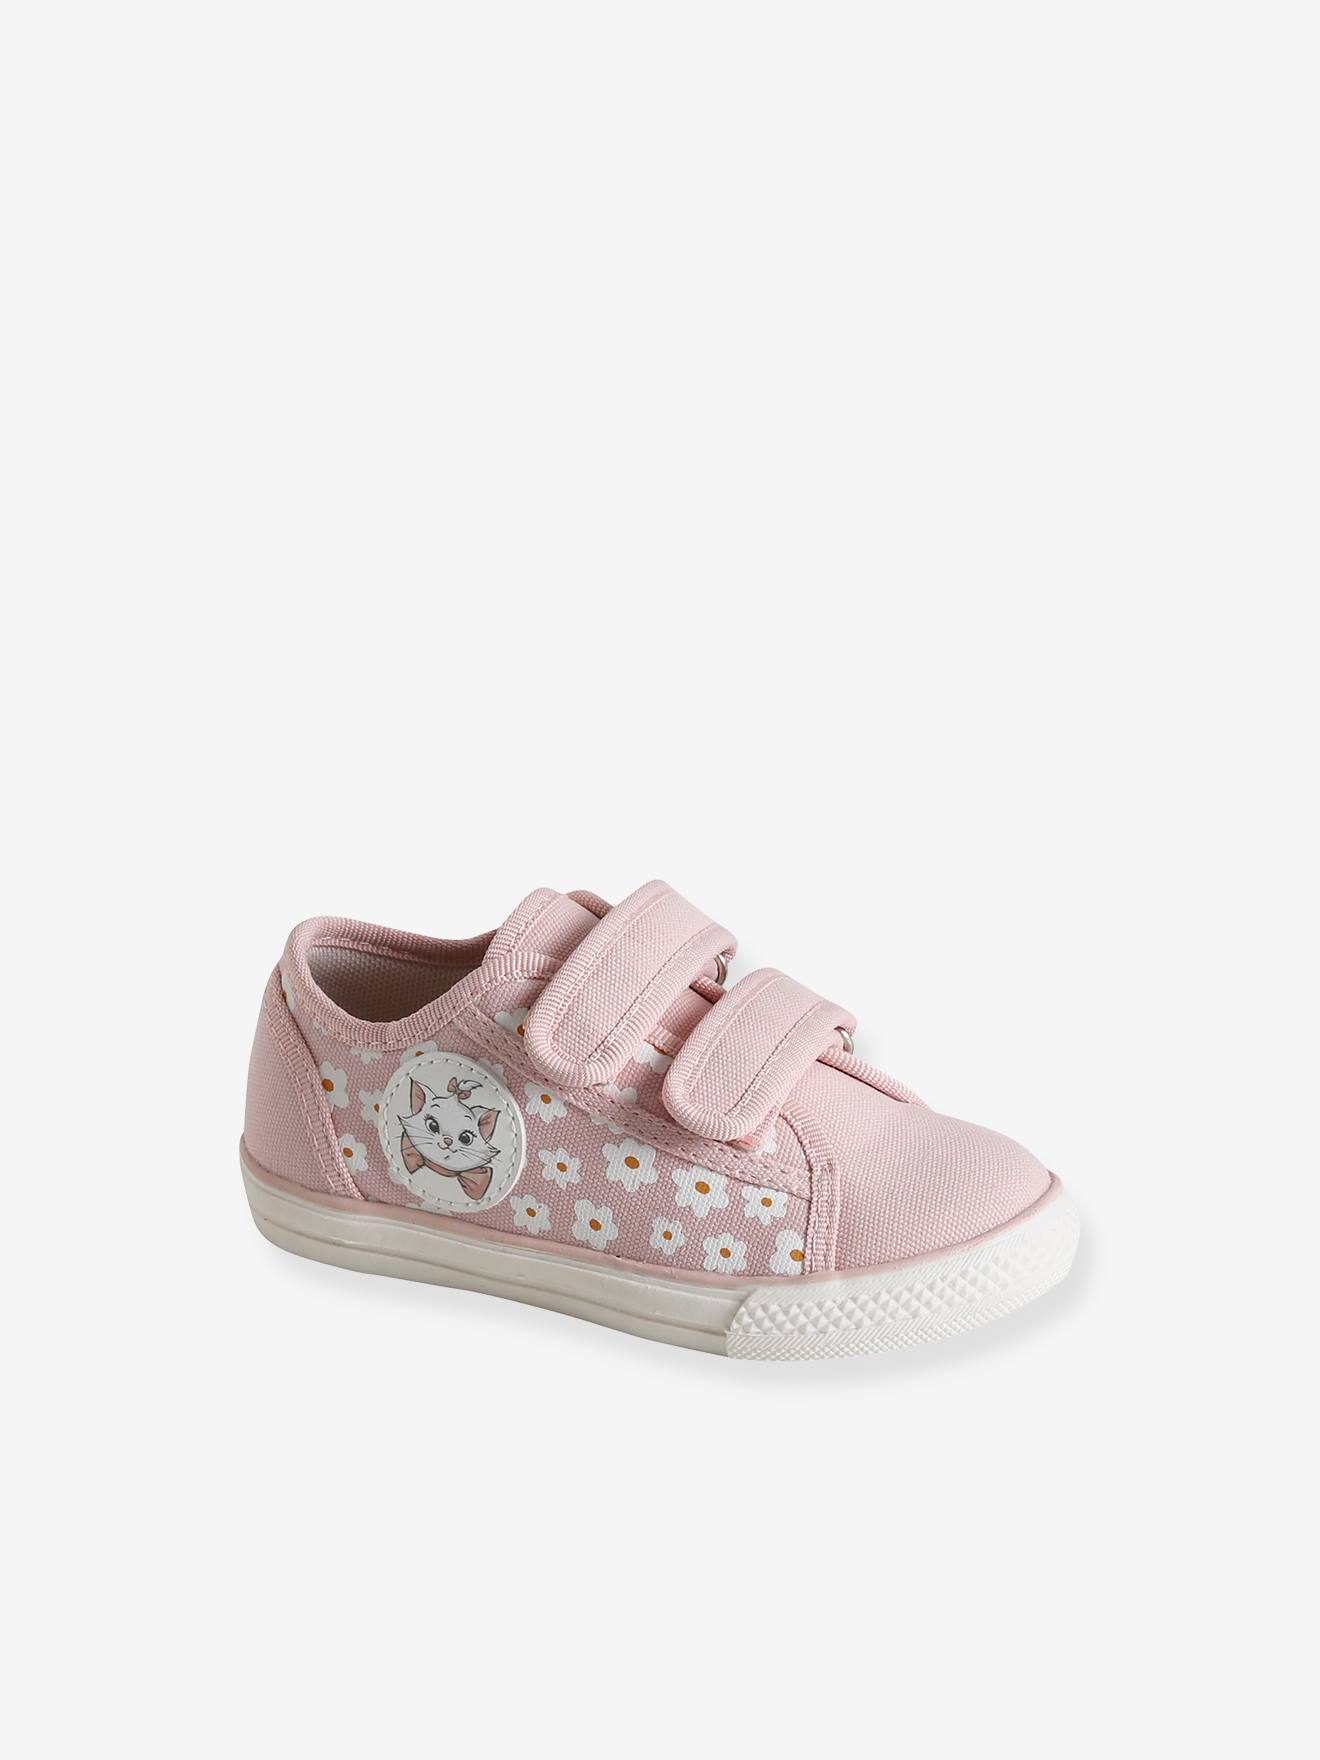 Trainers for Girls, Marie of The Aristocats by Disney(r) pale pink